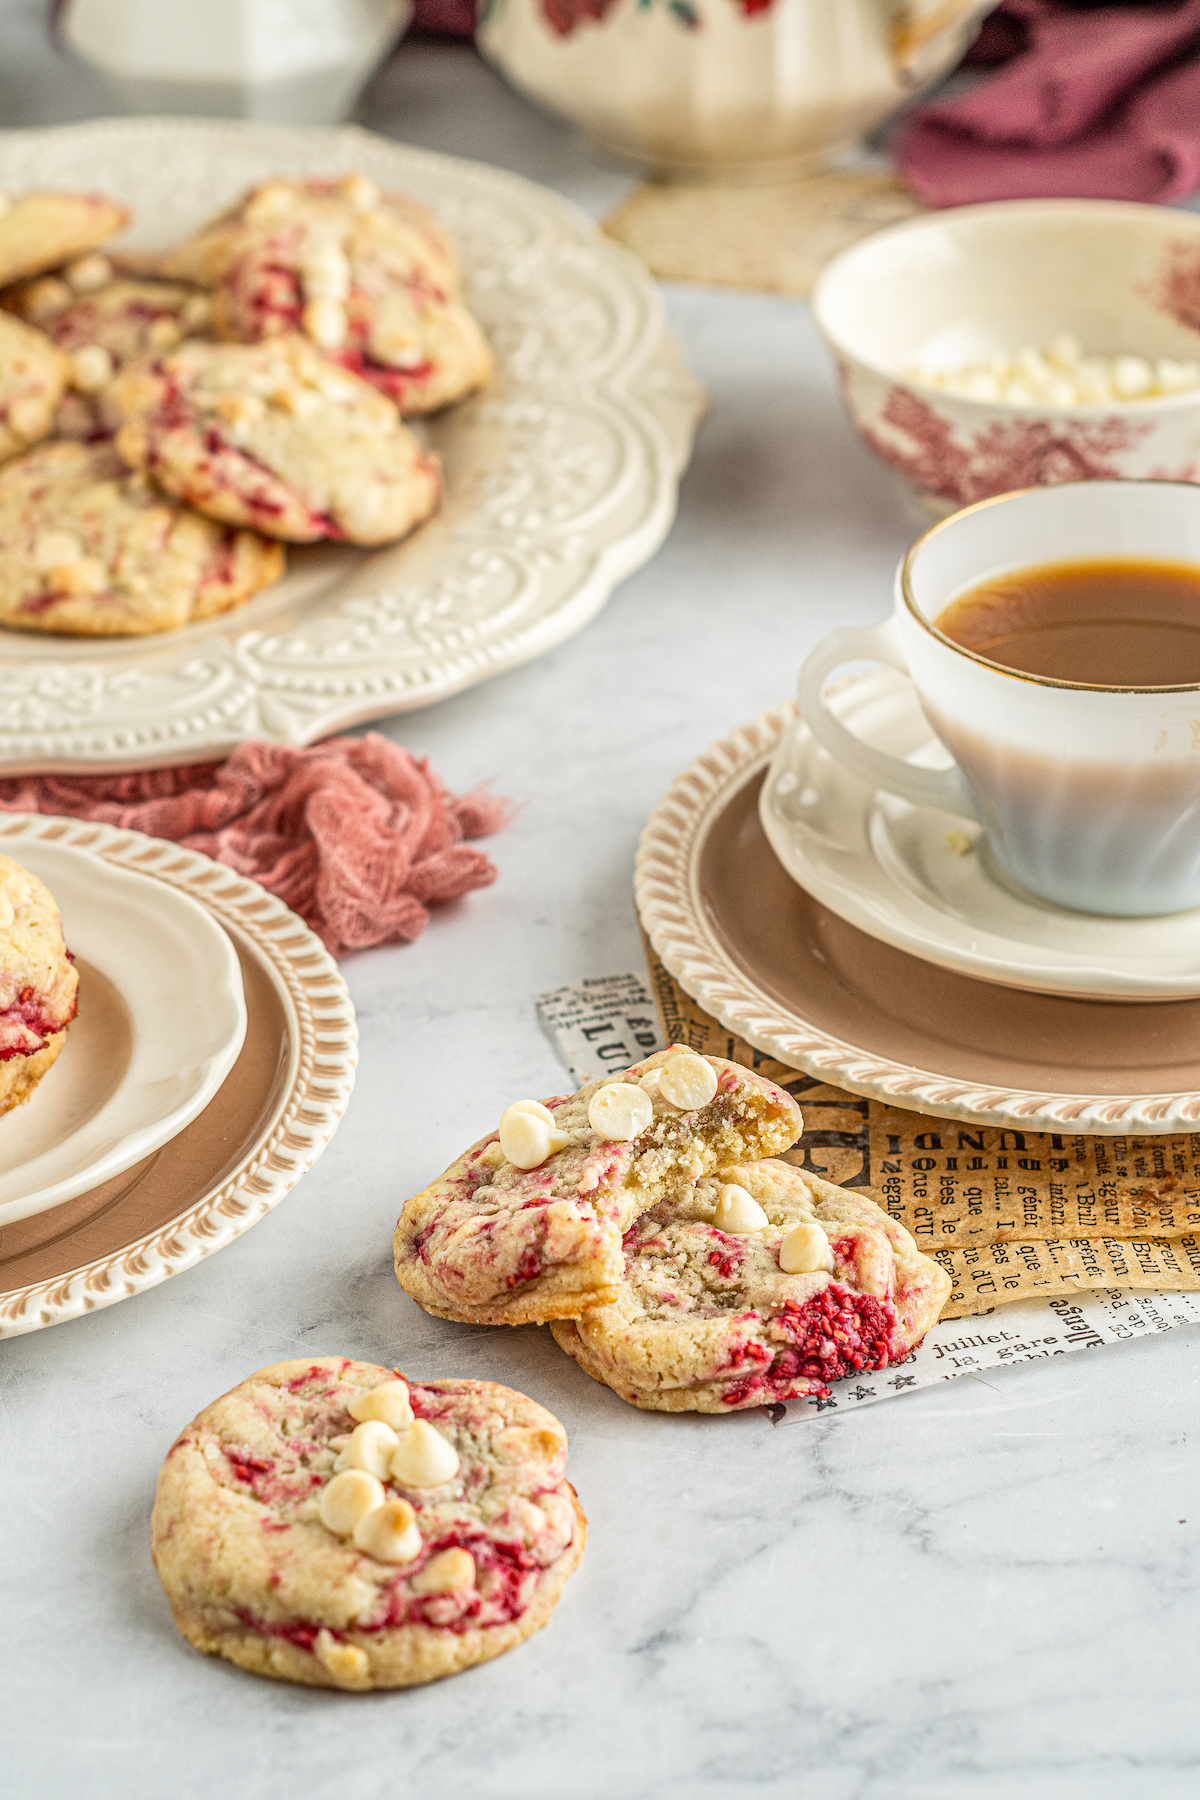 Cookies on a platter next to a cup of tea. Additional cookies are arranged artistically on the table and on dessert plates.